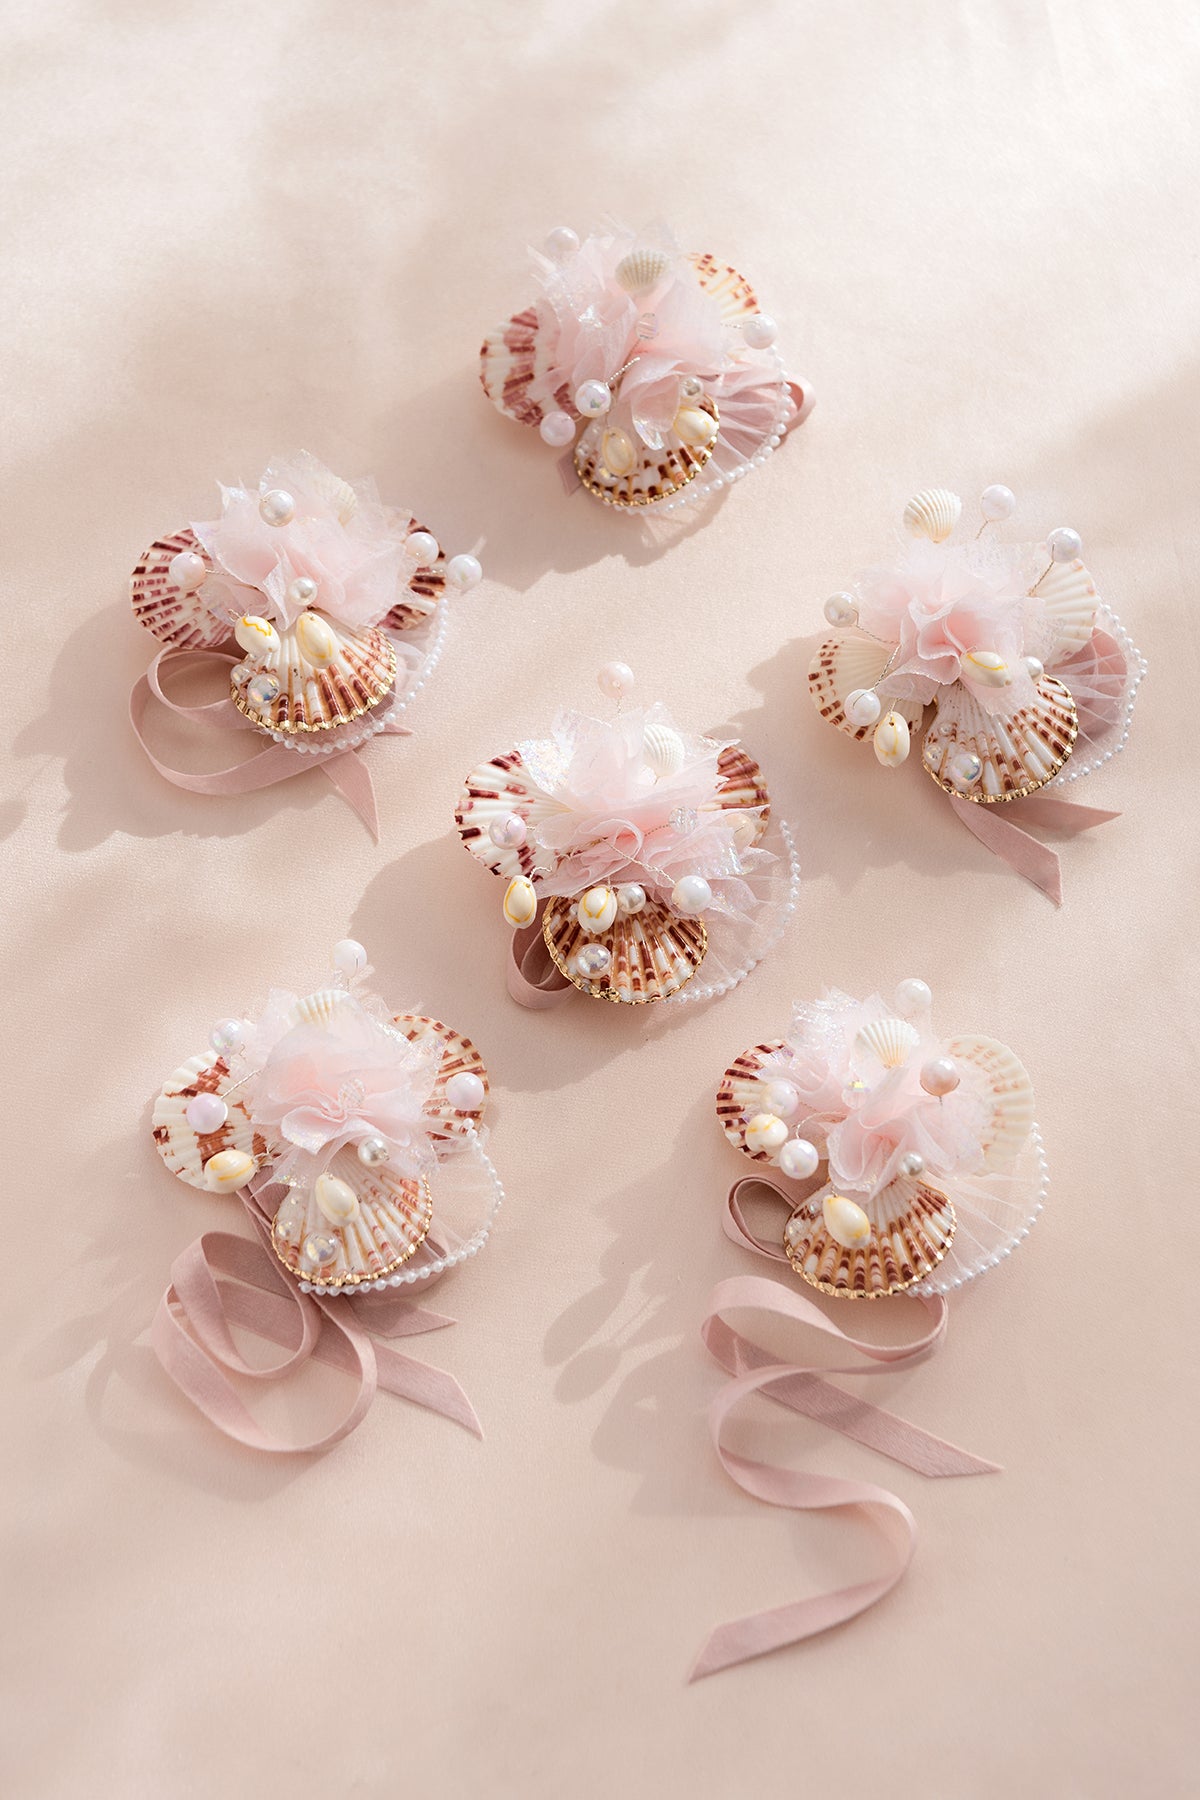 Wrist Corsages in Glowing Blush & Pearl